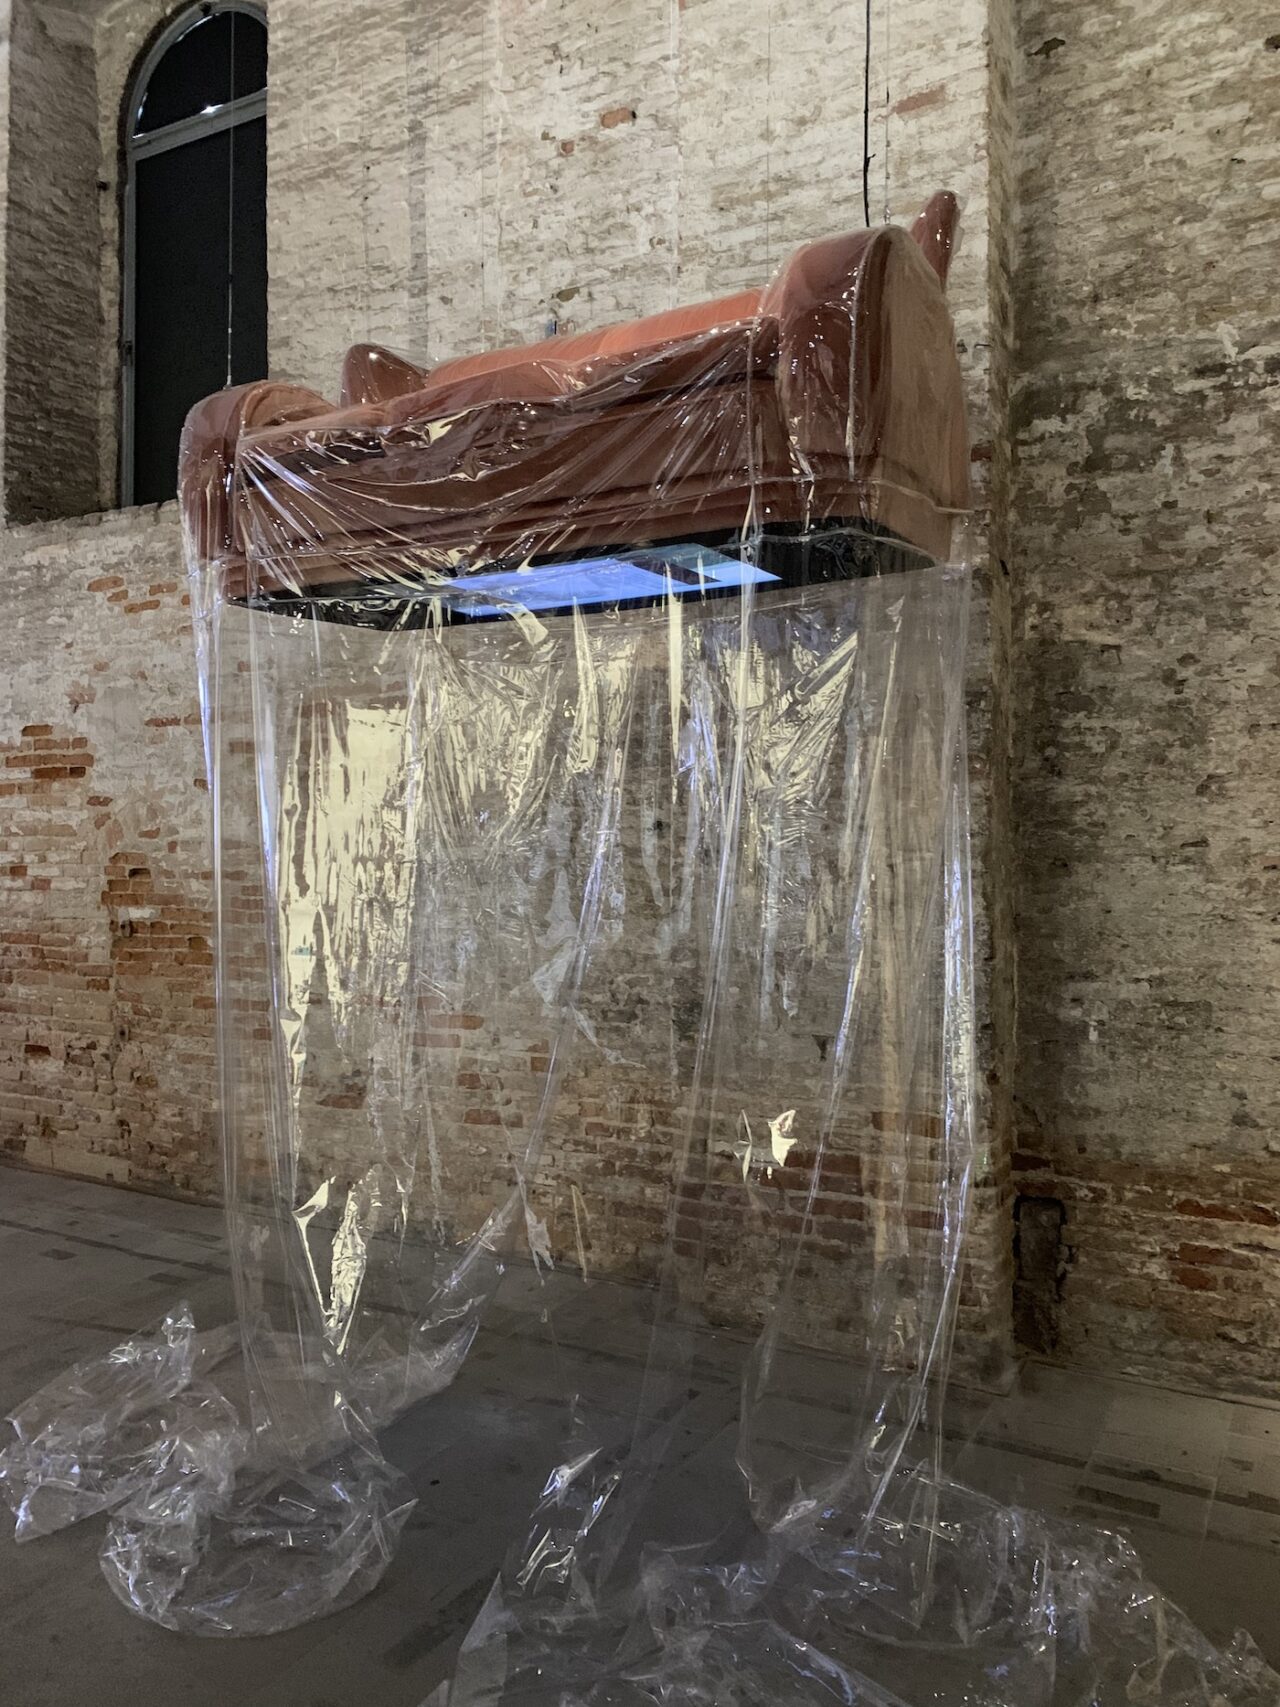 Sondra Perry, Lineage for a Phantom Zone, 2020-2022. Installation View of “The Milk of Dreams” at Arsenale. Photo: C&